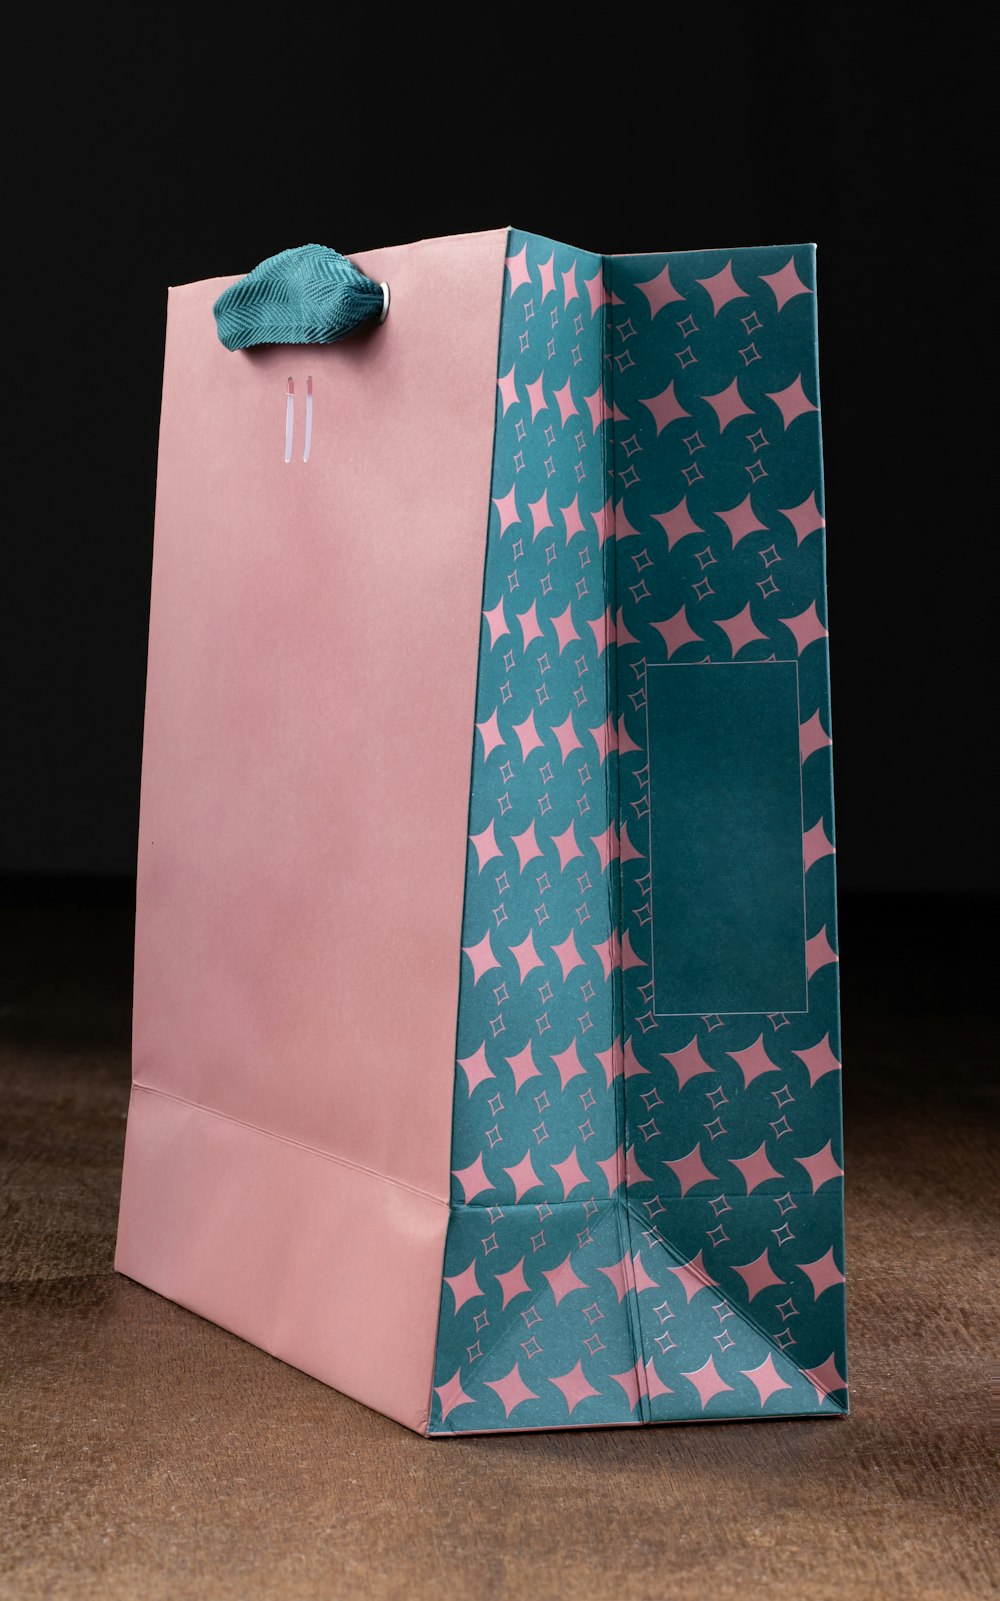 a pink and blue shopping bag with stars on it